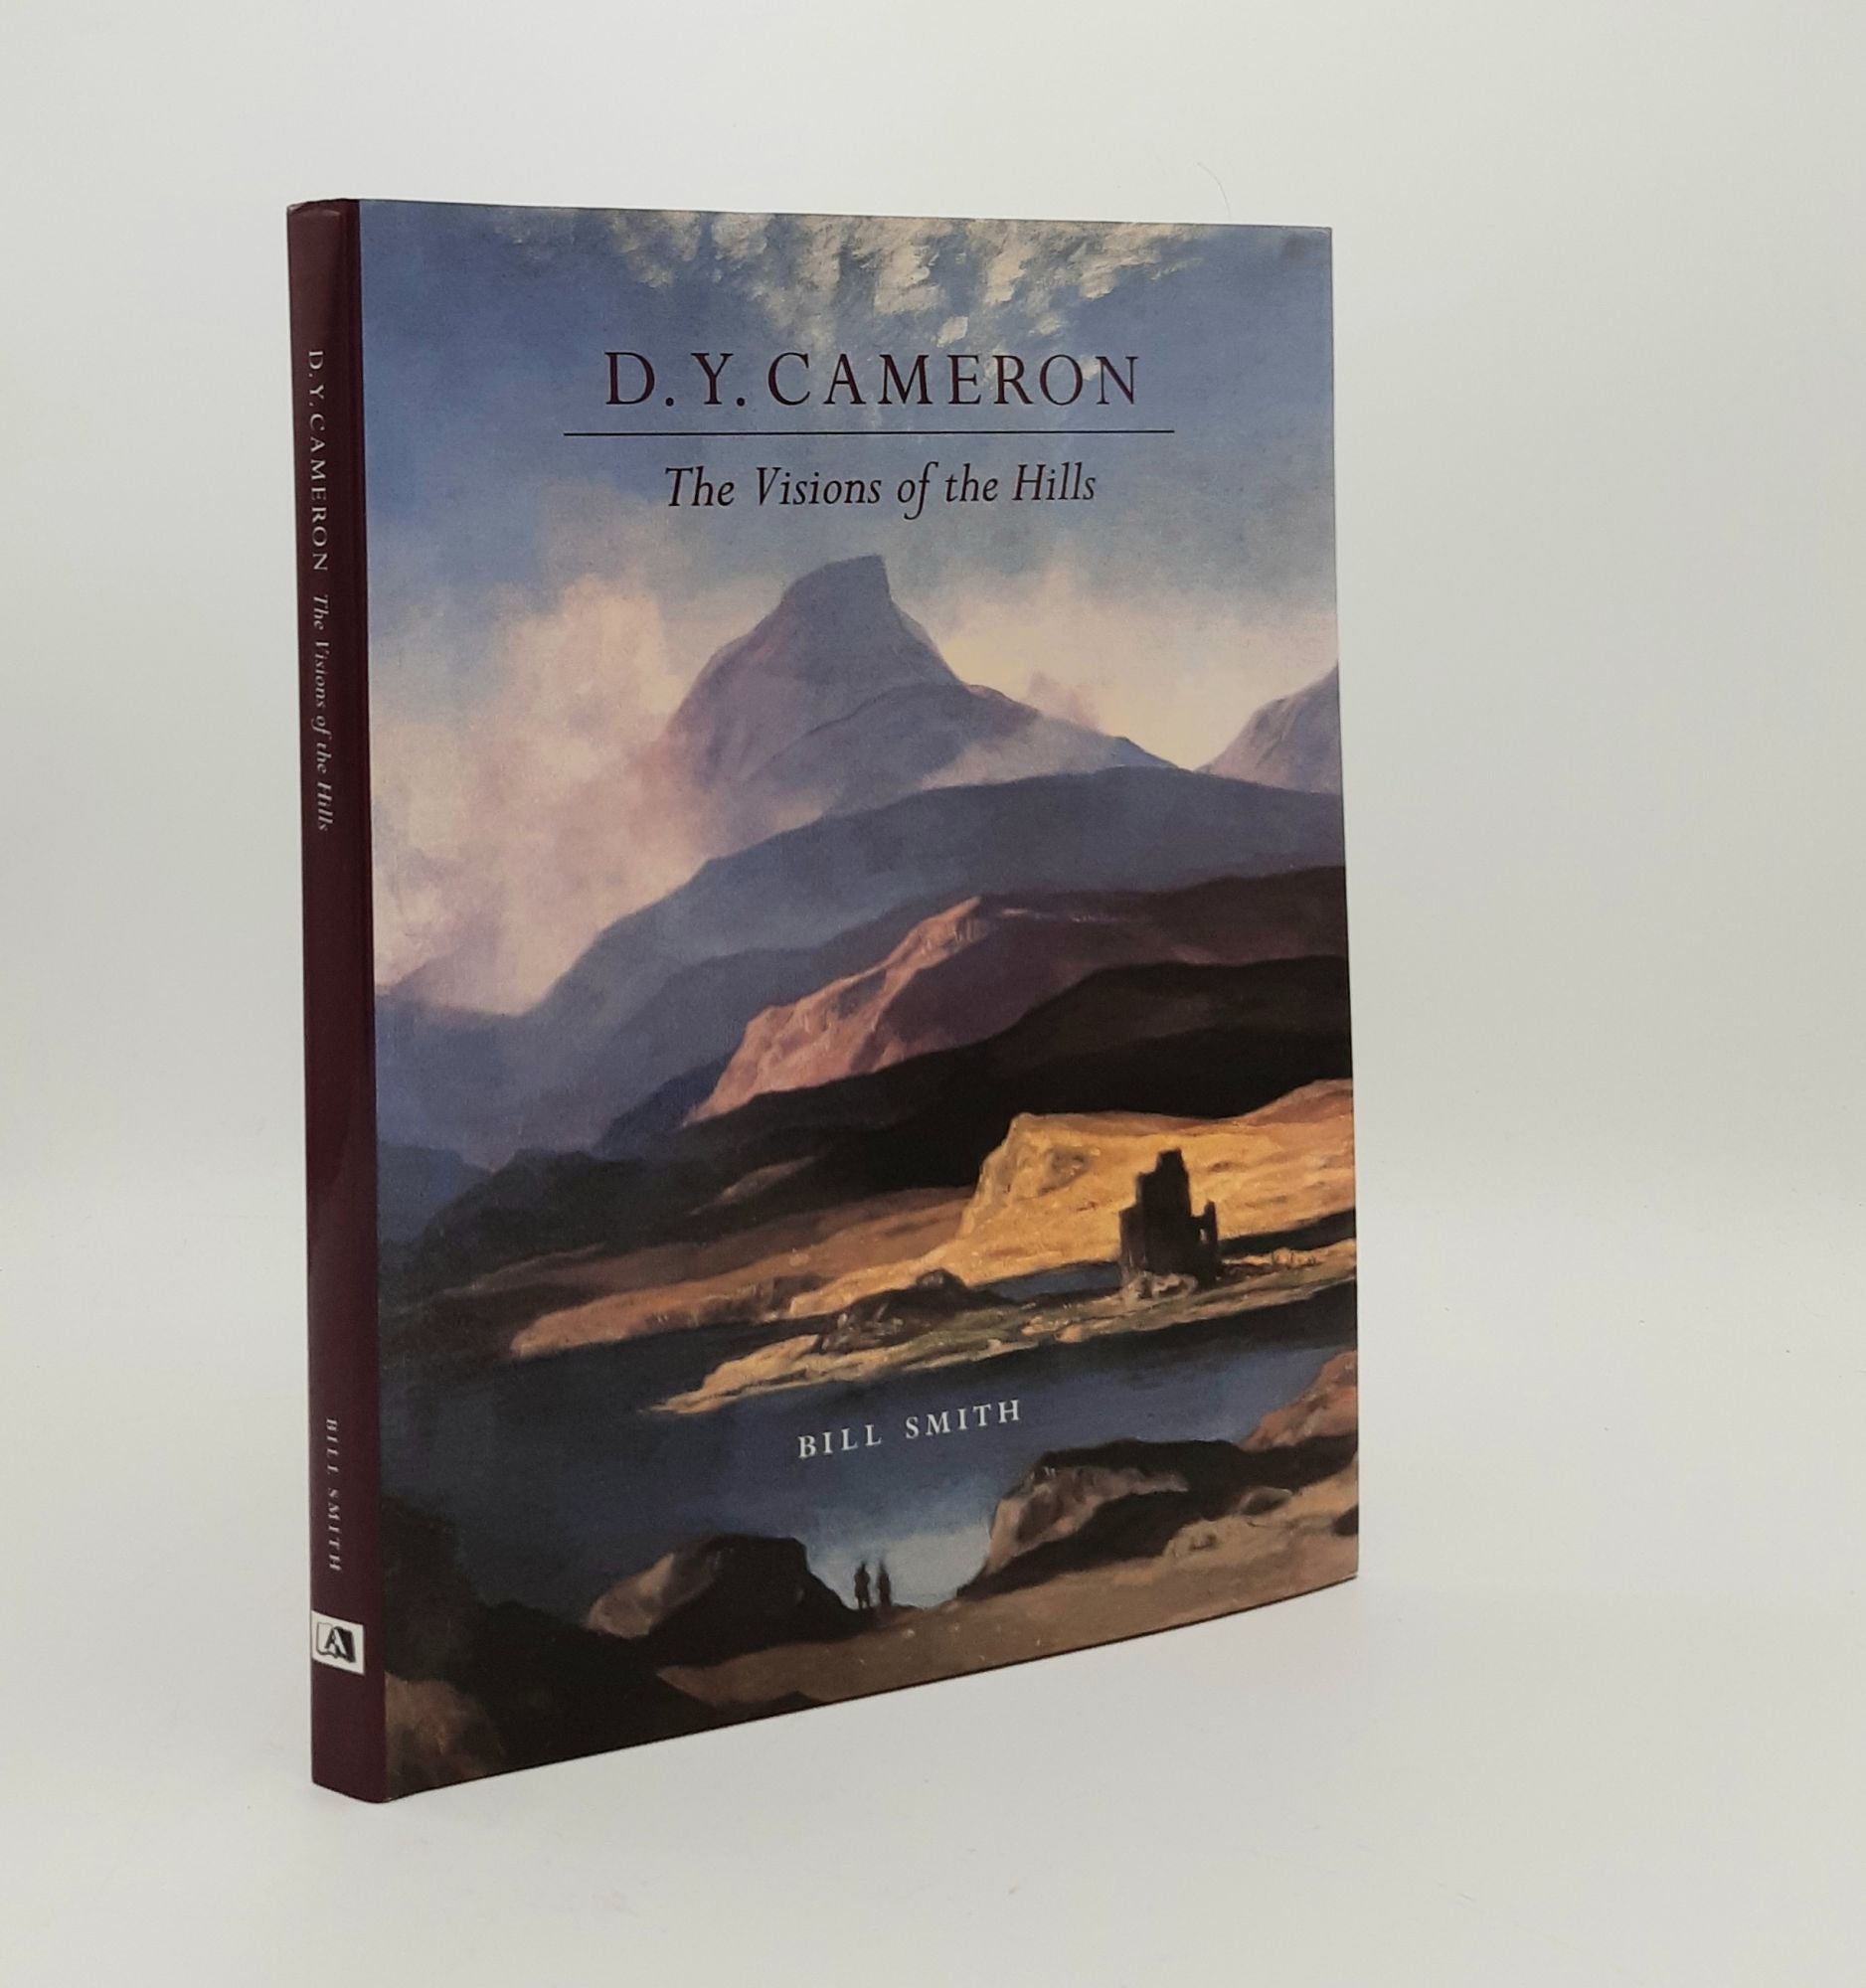 SMITH Bill - D.Y. Cameron the Visions of the Hills